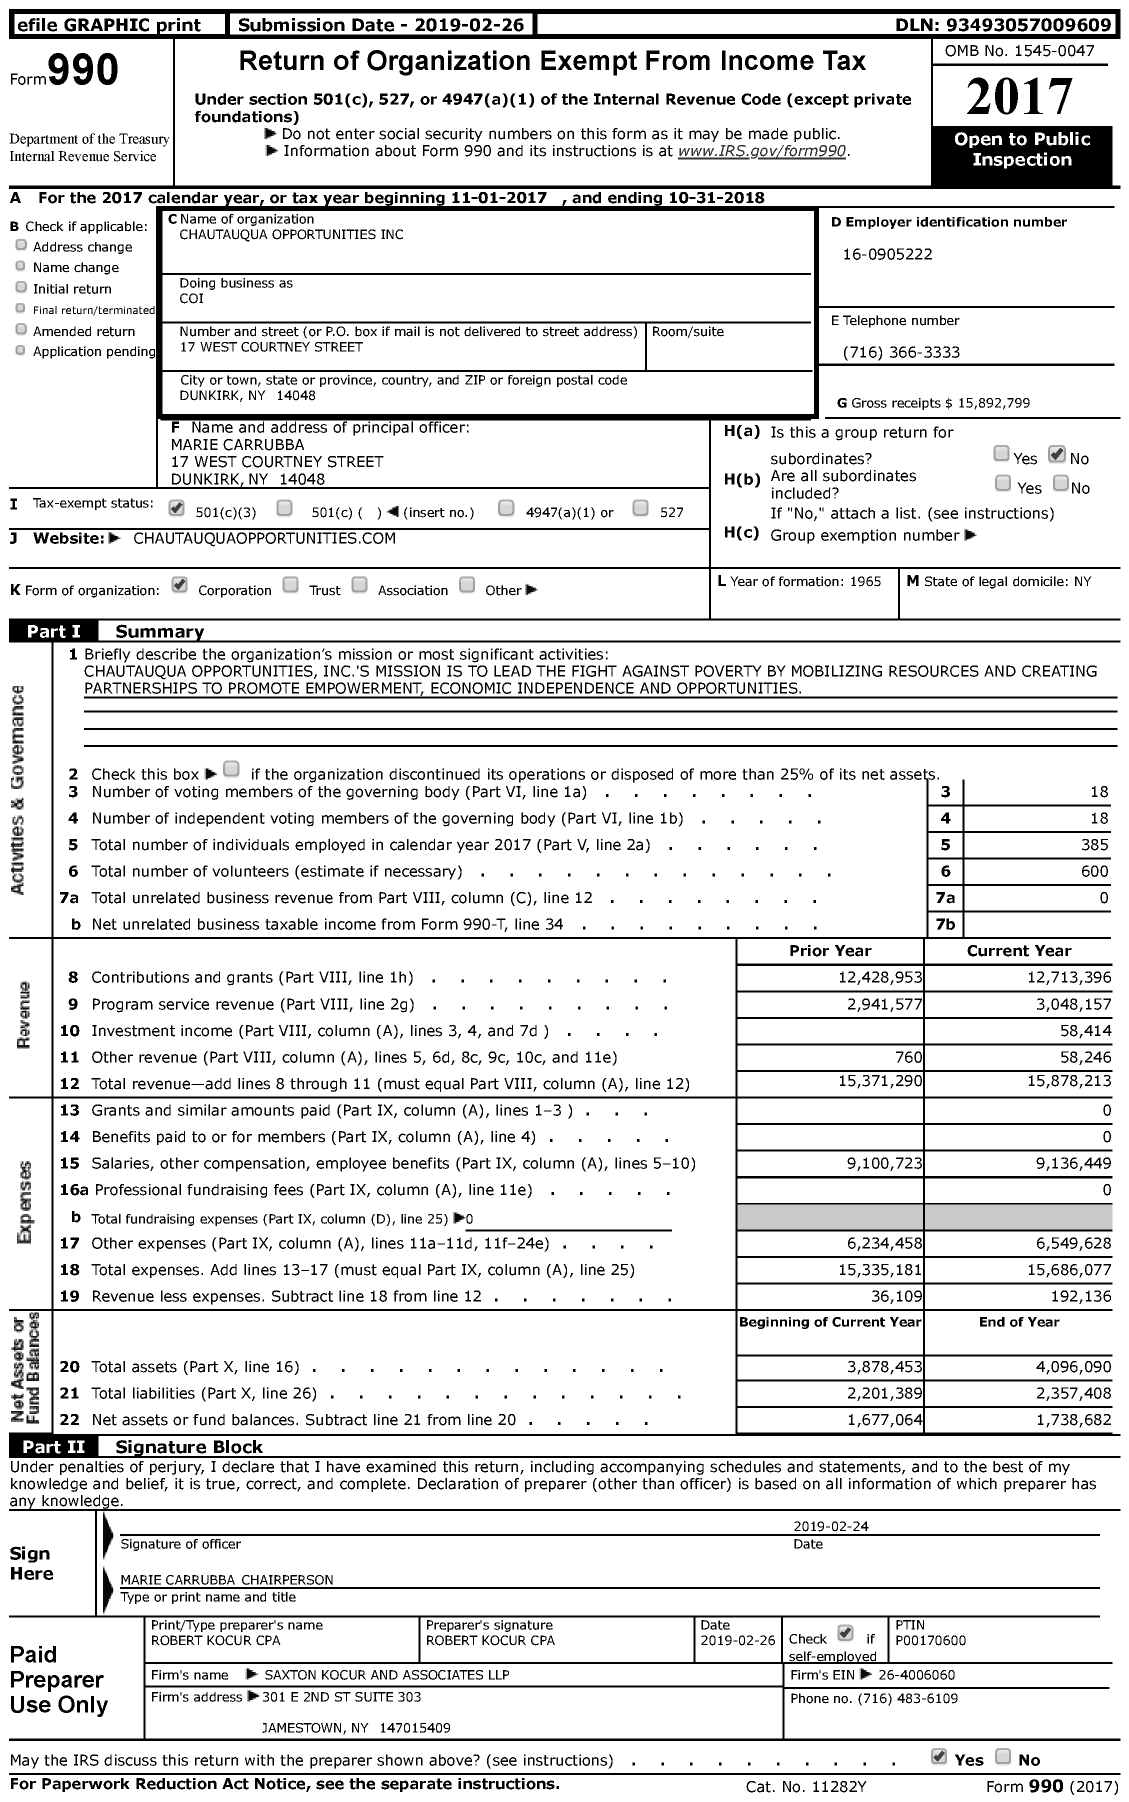 Image of first page of 2017 Form 990 for Chautauqua Opportunities Incorporation (COI)